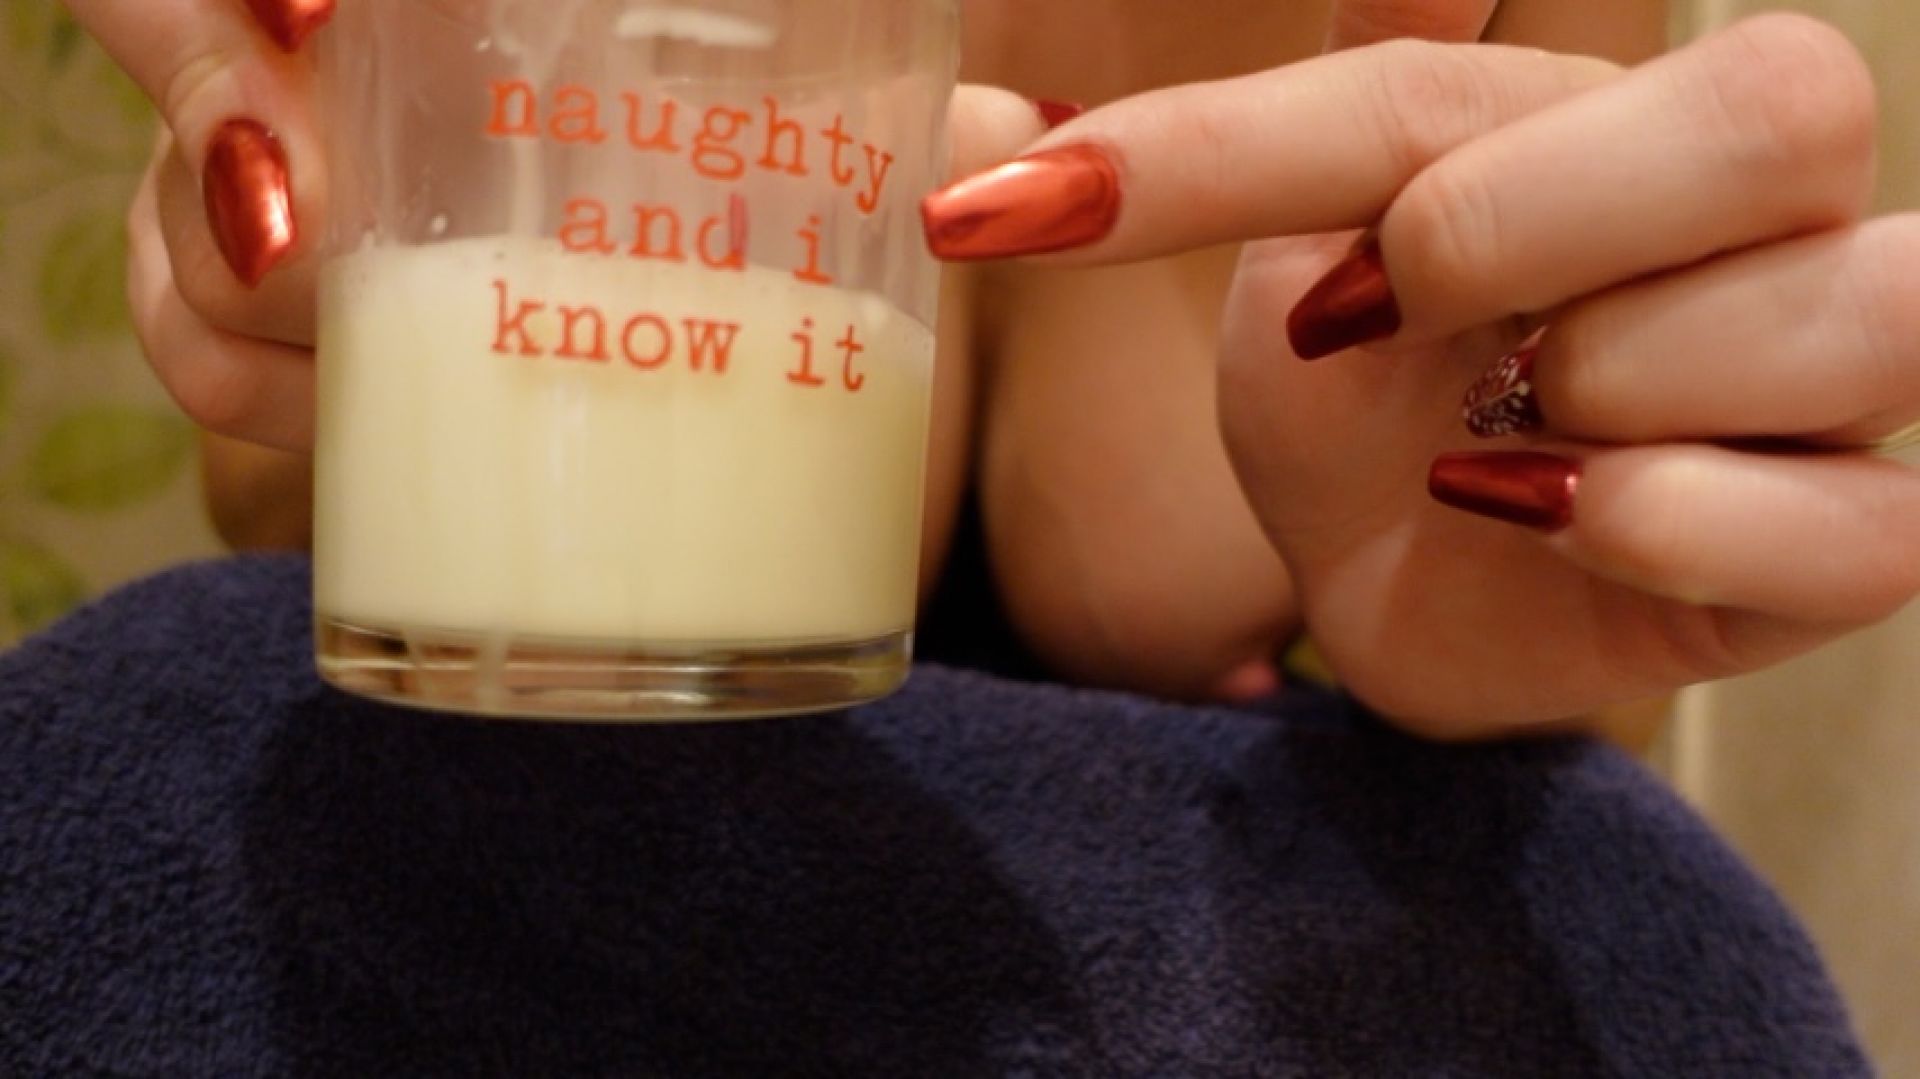 leaked Expressing milk into a cup and swallowing video thumbnail